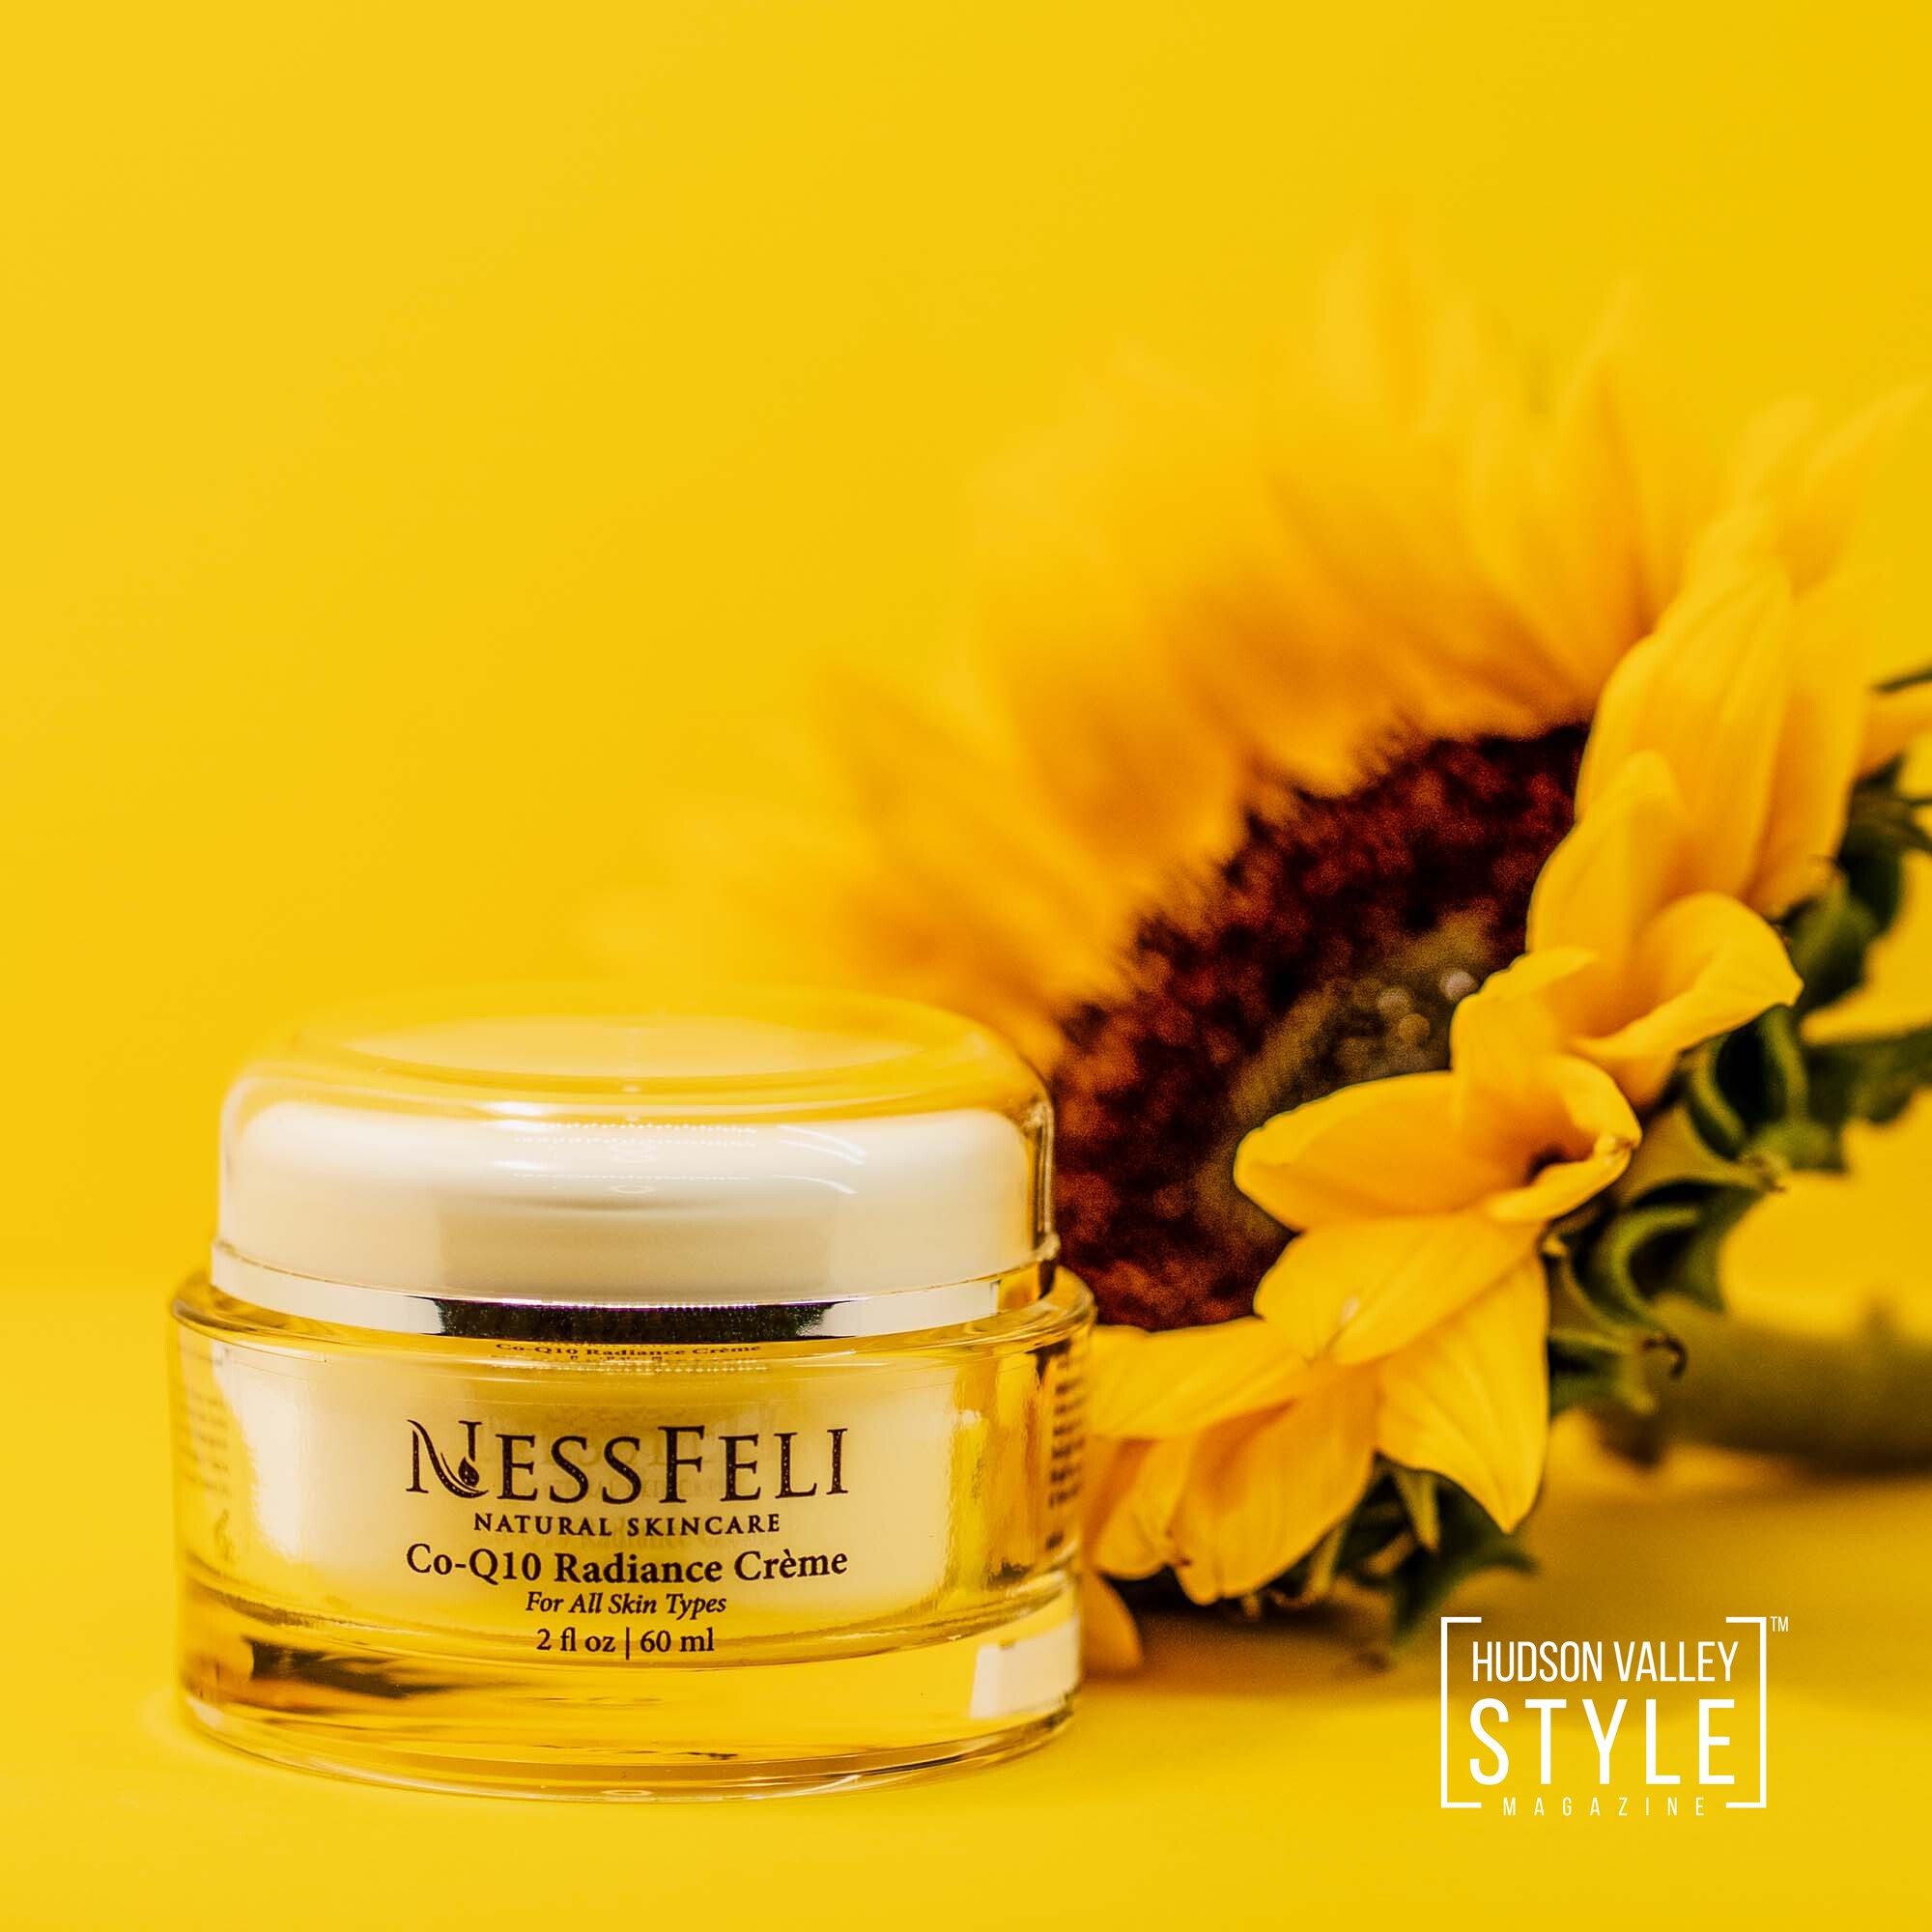 Co-Q10 Radiance Crème by Nessfeli Natural Skincare – Hudson Valley Style Magazine Gift Guide